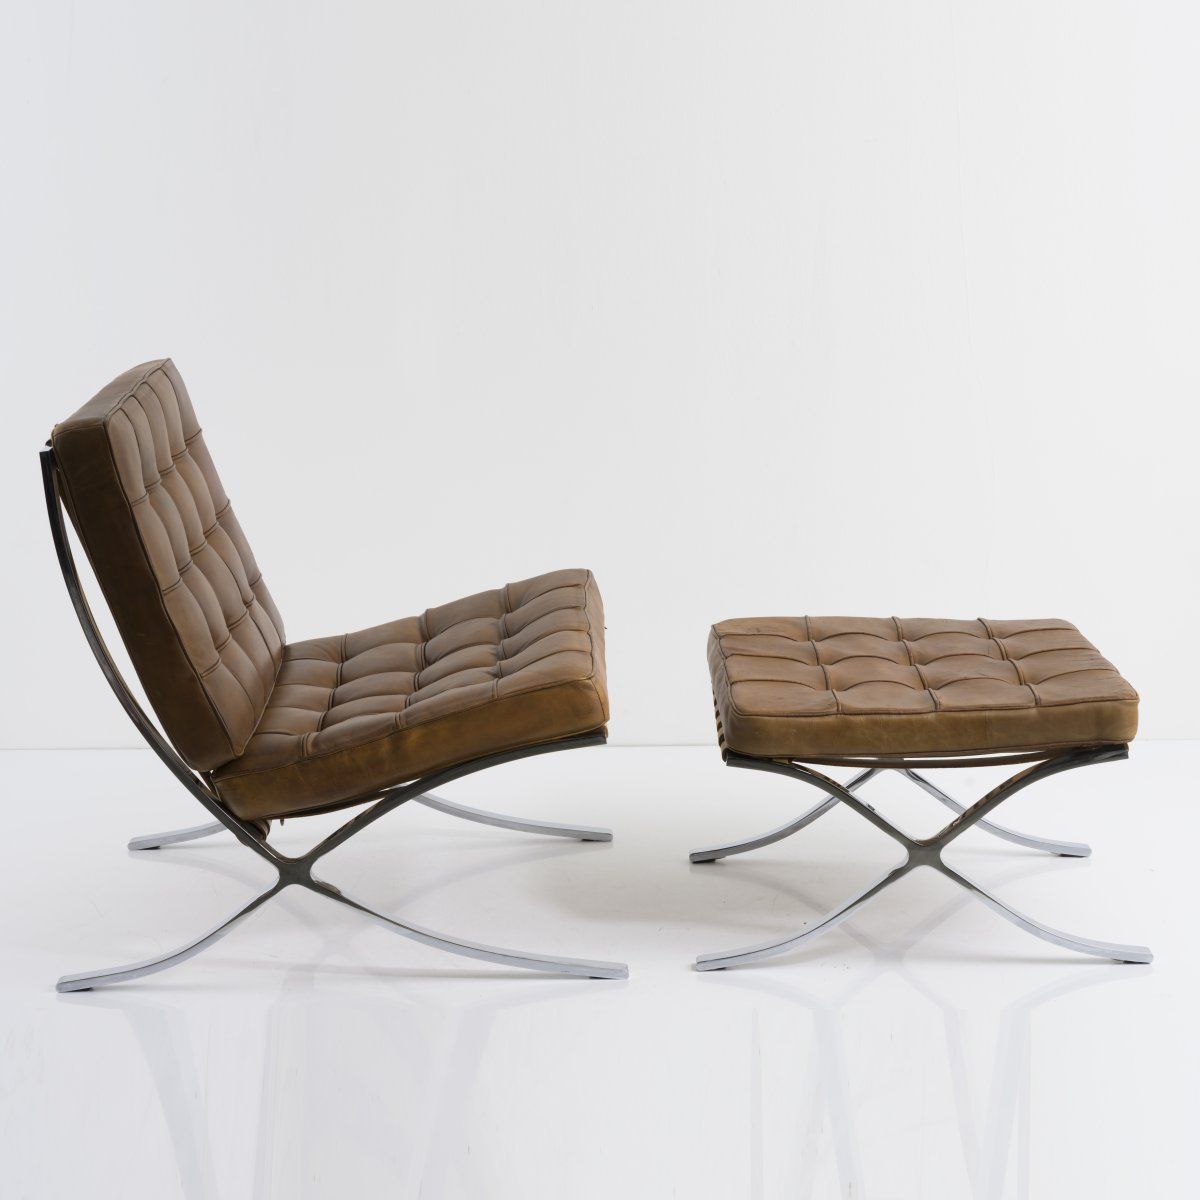 Null Ludwig Mies van der Rohe, "Barcelona chair" avec ottoman, 1929, Chaise long&hellip;